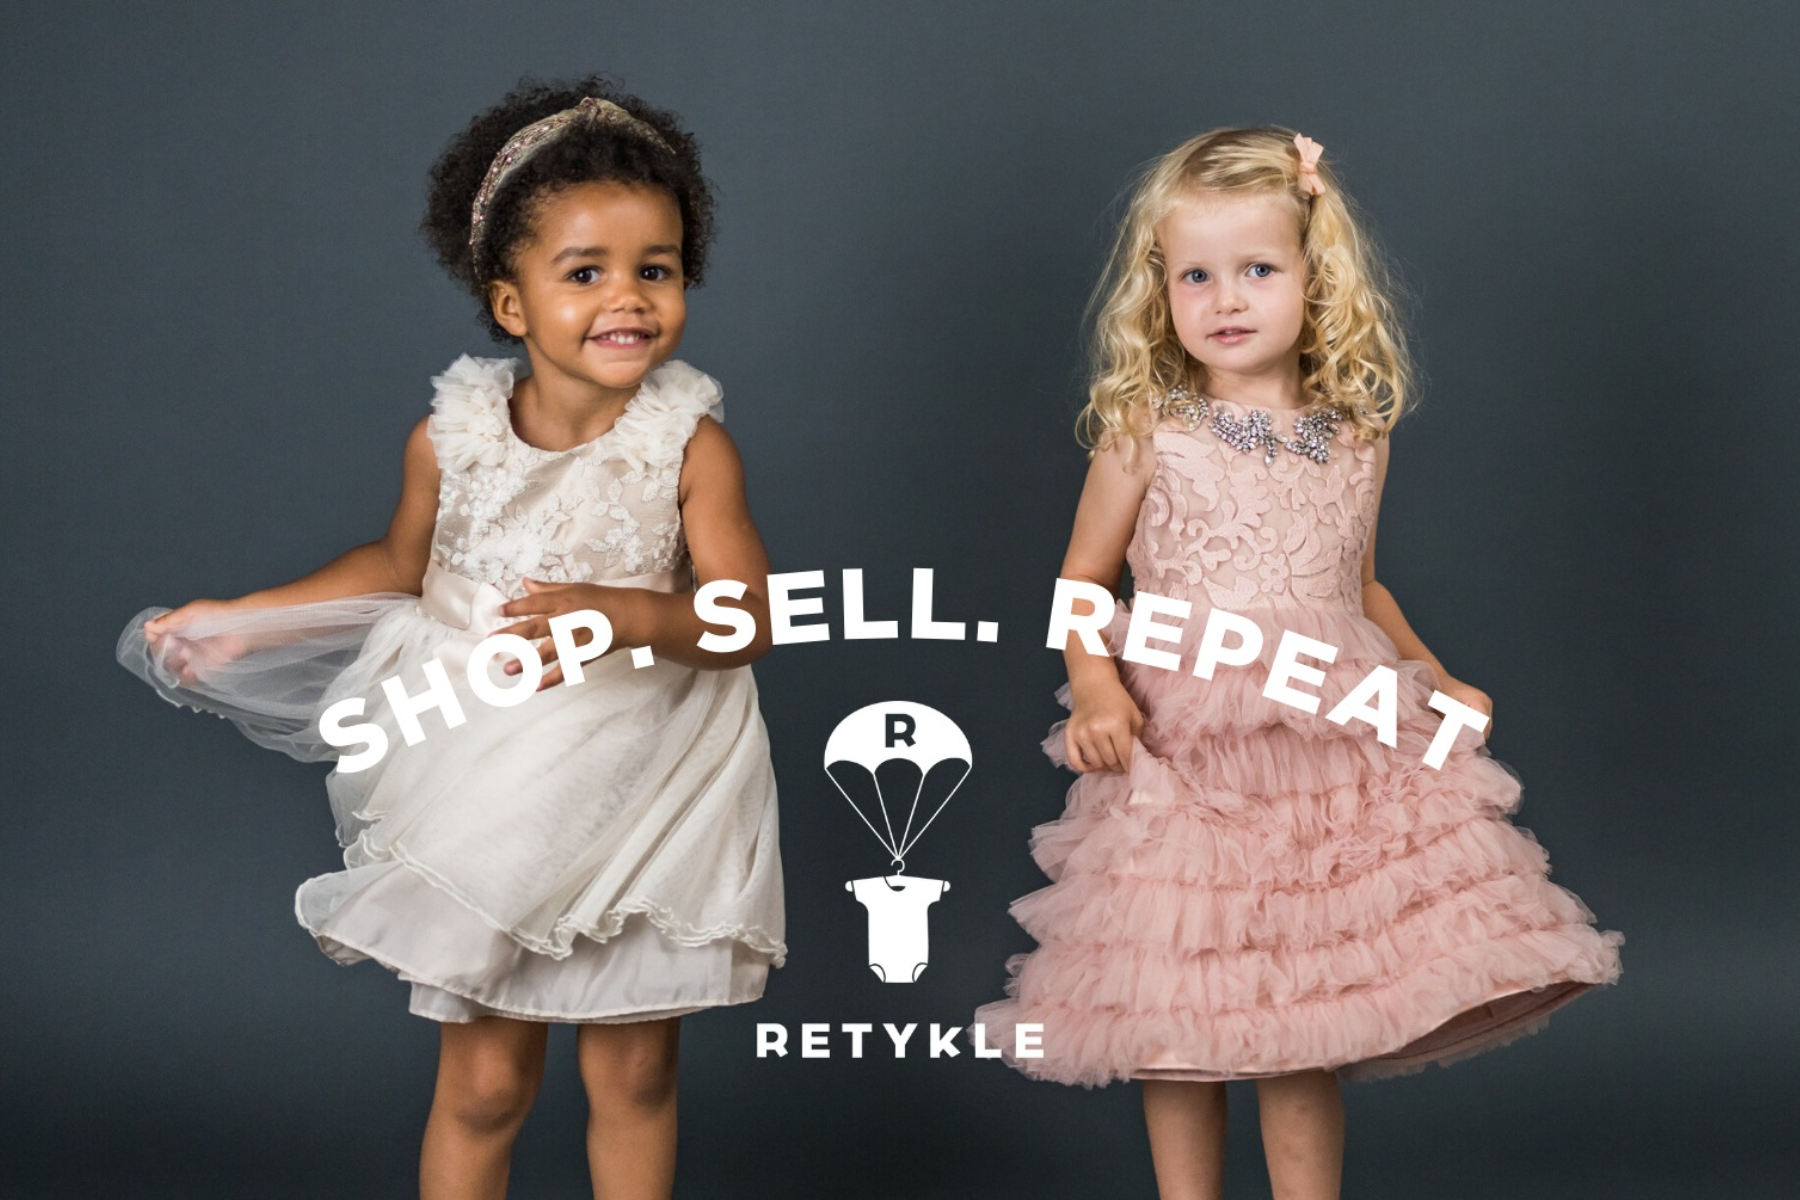 Sarah Garner founded Retykle to make sustainable fashion more accessible for parents, reducing waste in the process.